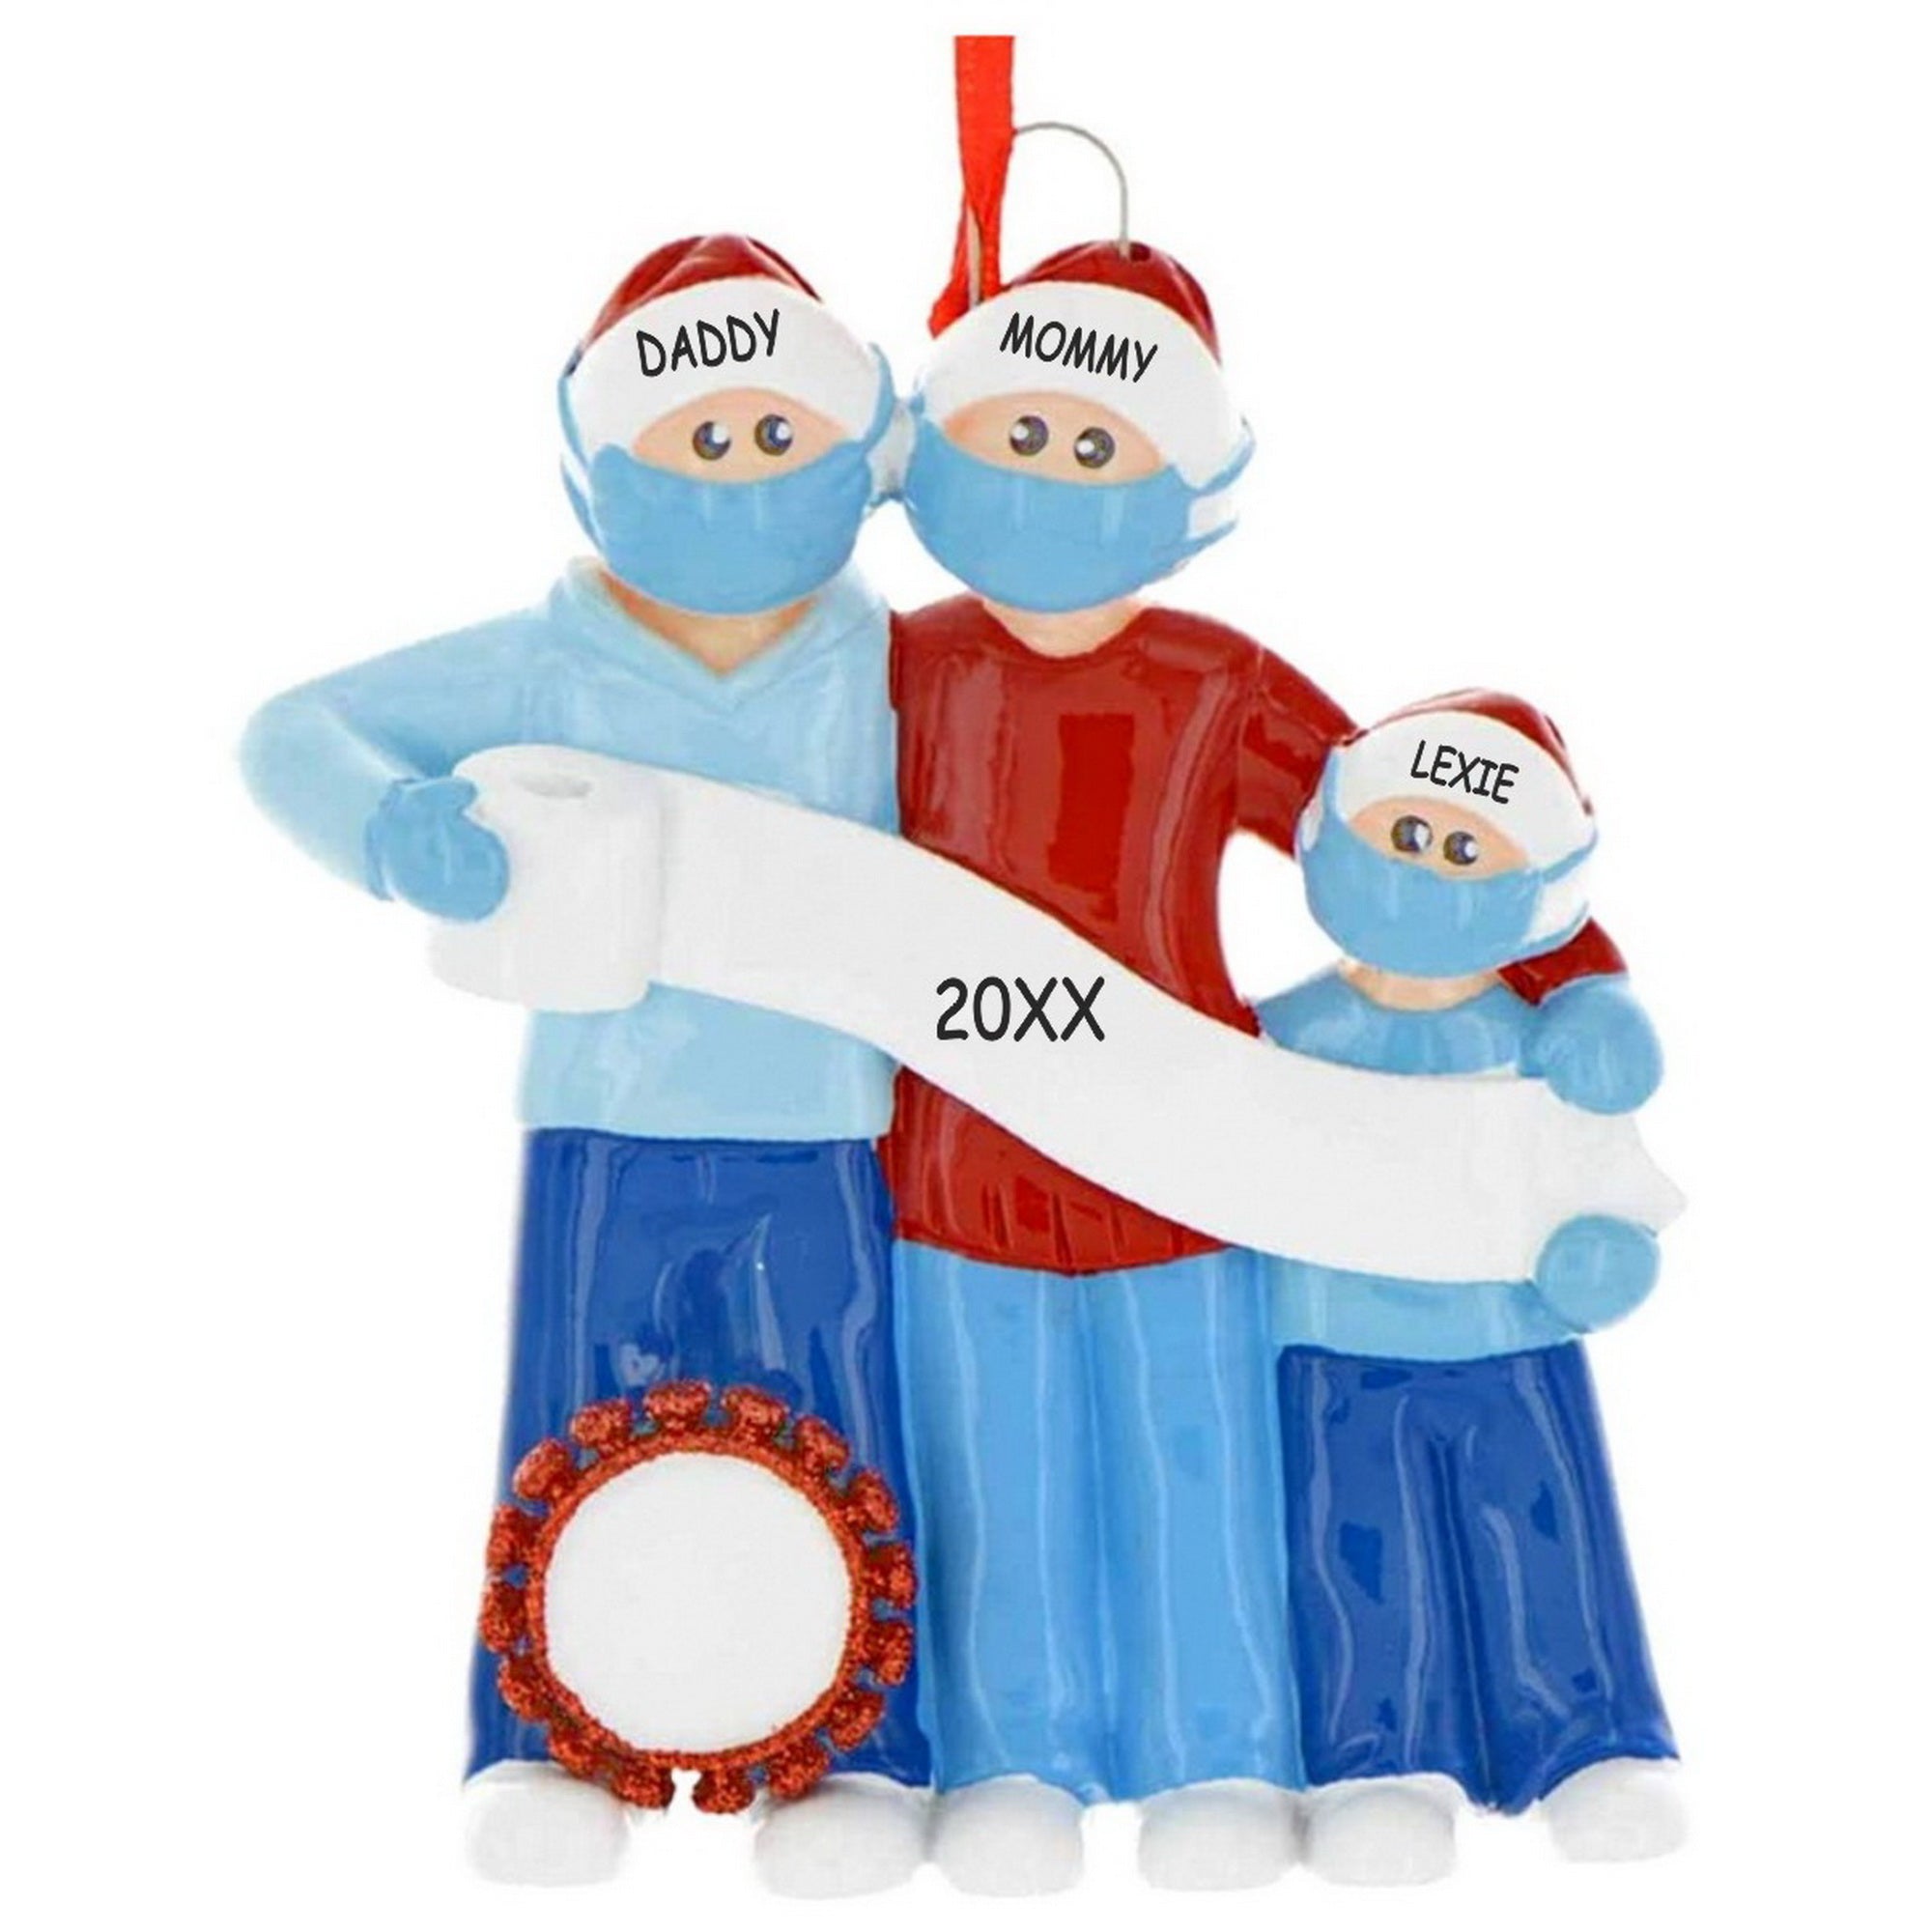 Personalized Pandemic TP Family Christmas Ornament - Family of 3